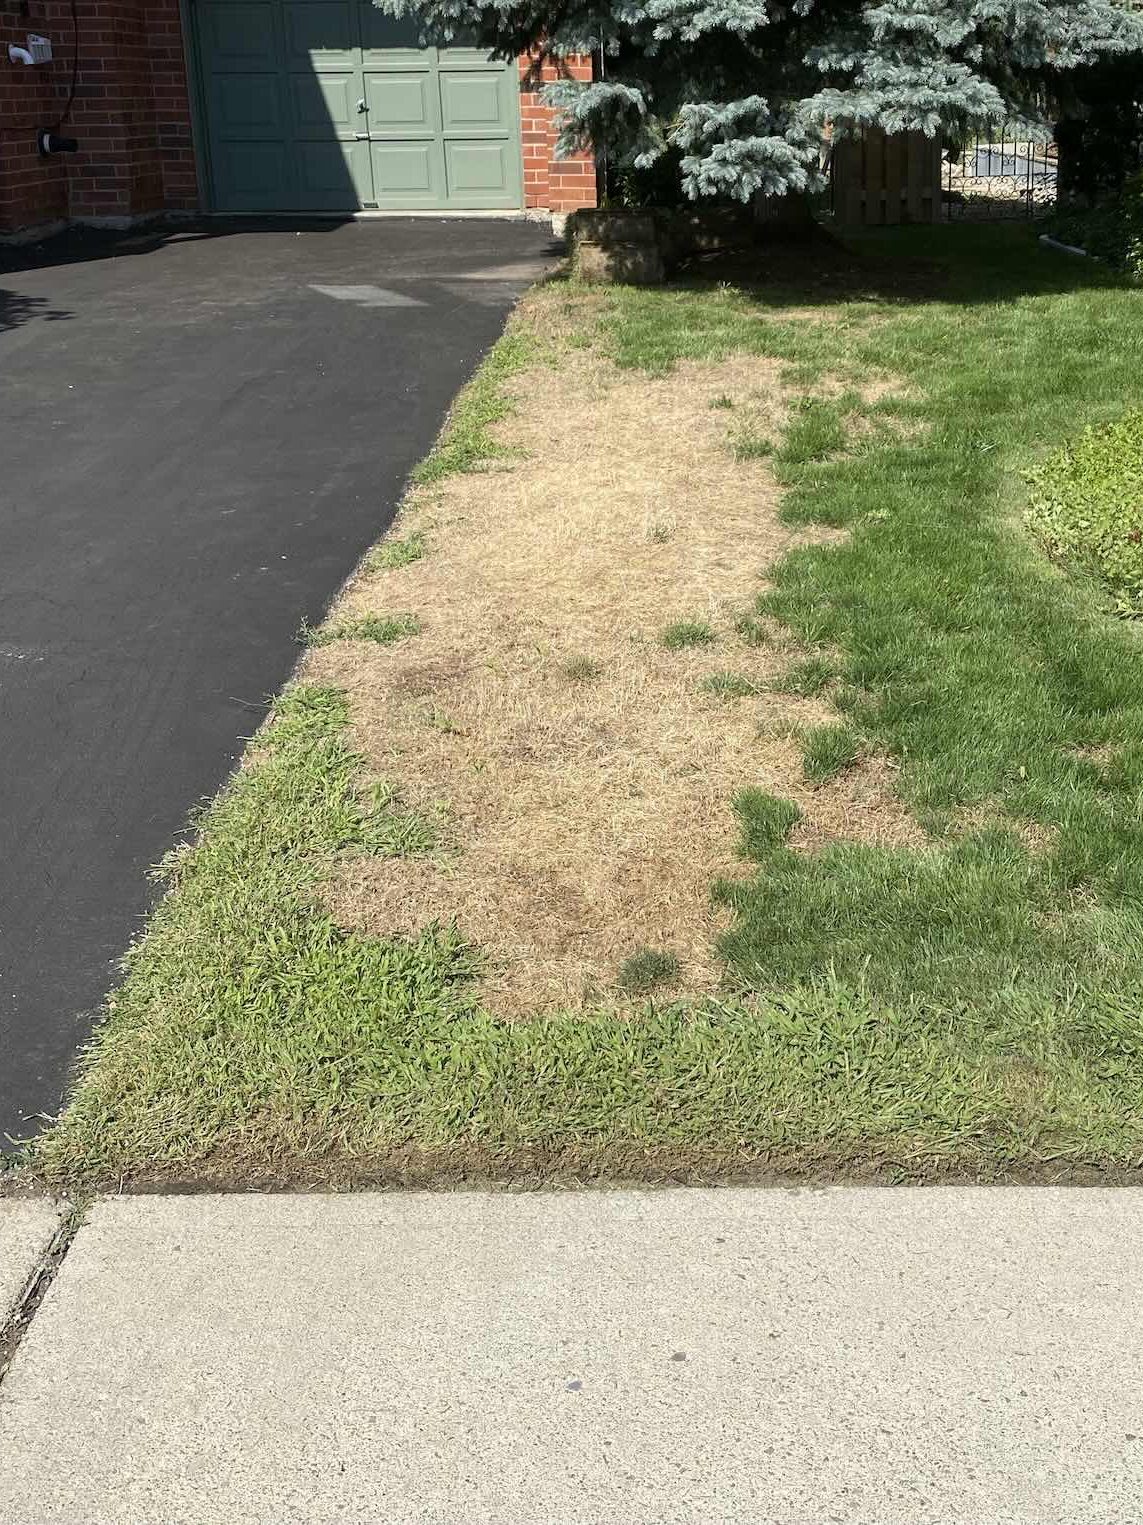 Lawn damage caused from driveway salt